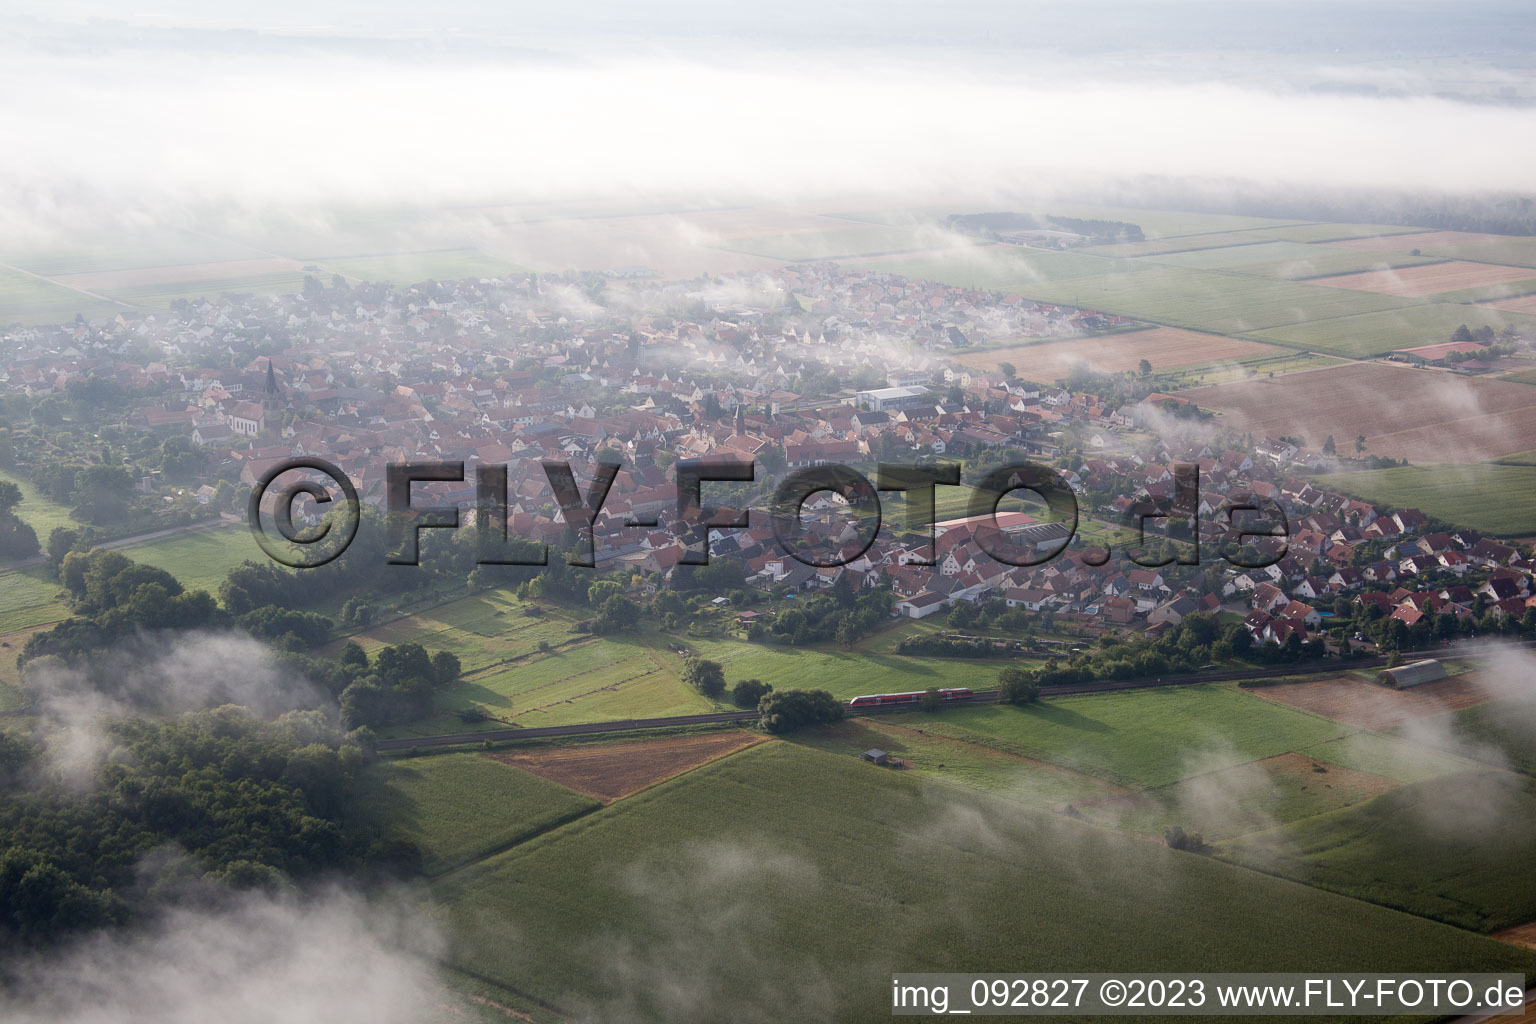 From northwest in Steinweiler in the state Rhineland-Palatinate, Germany out of the air